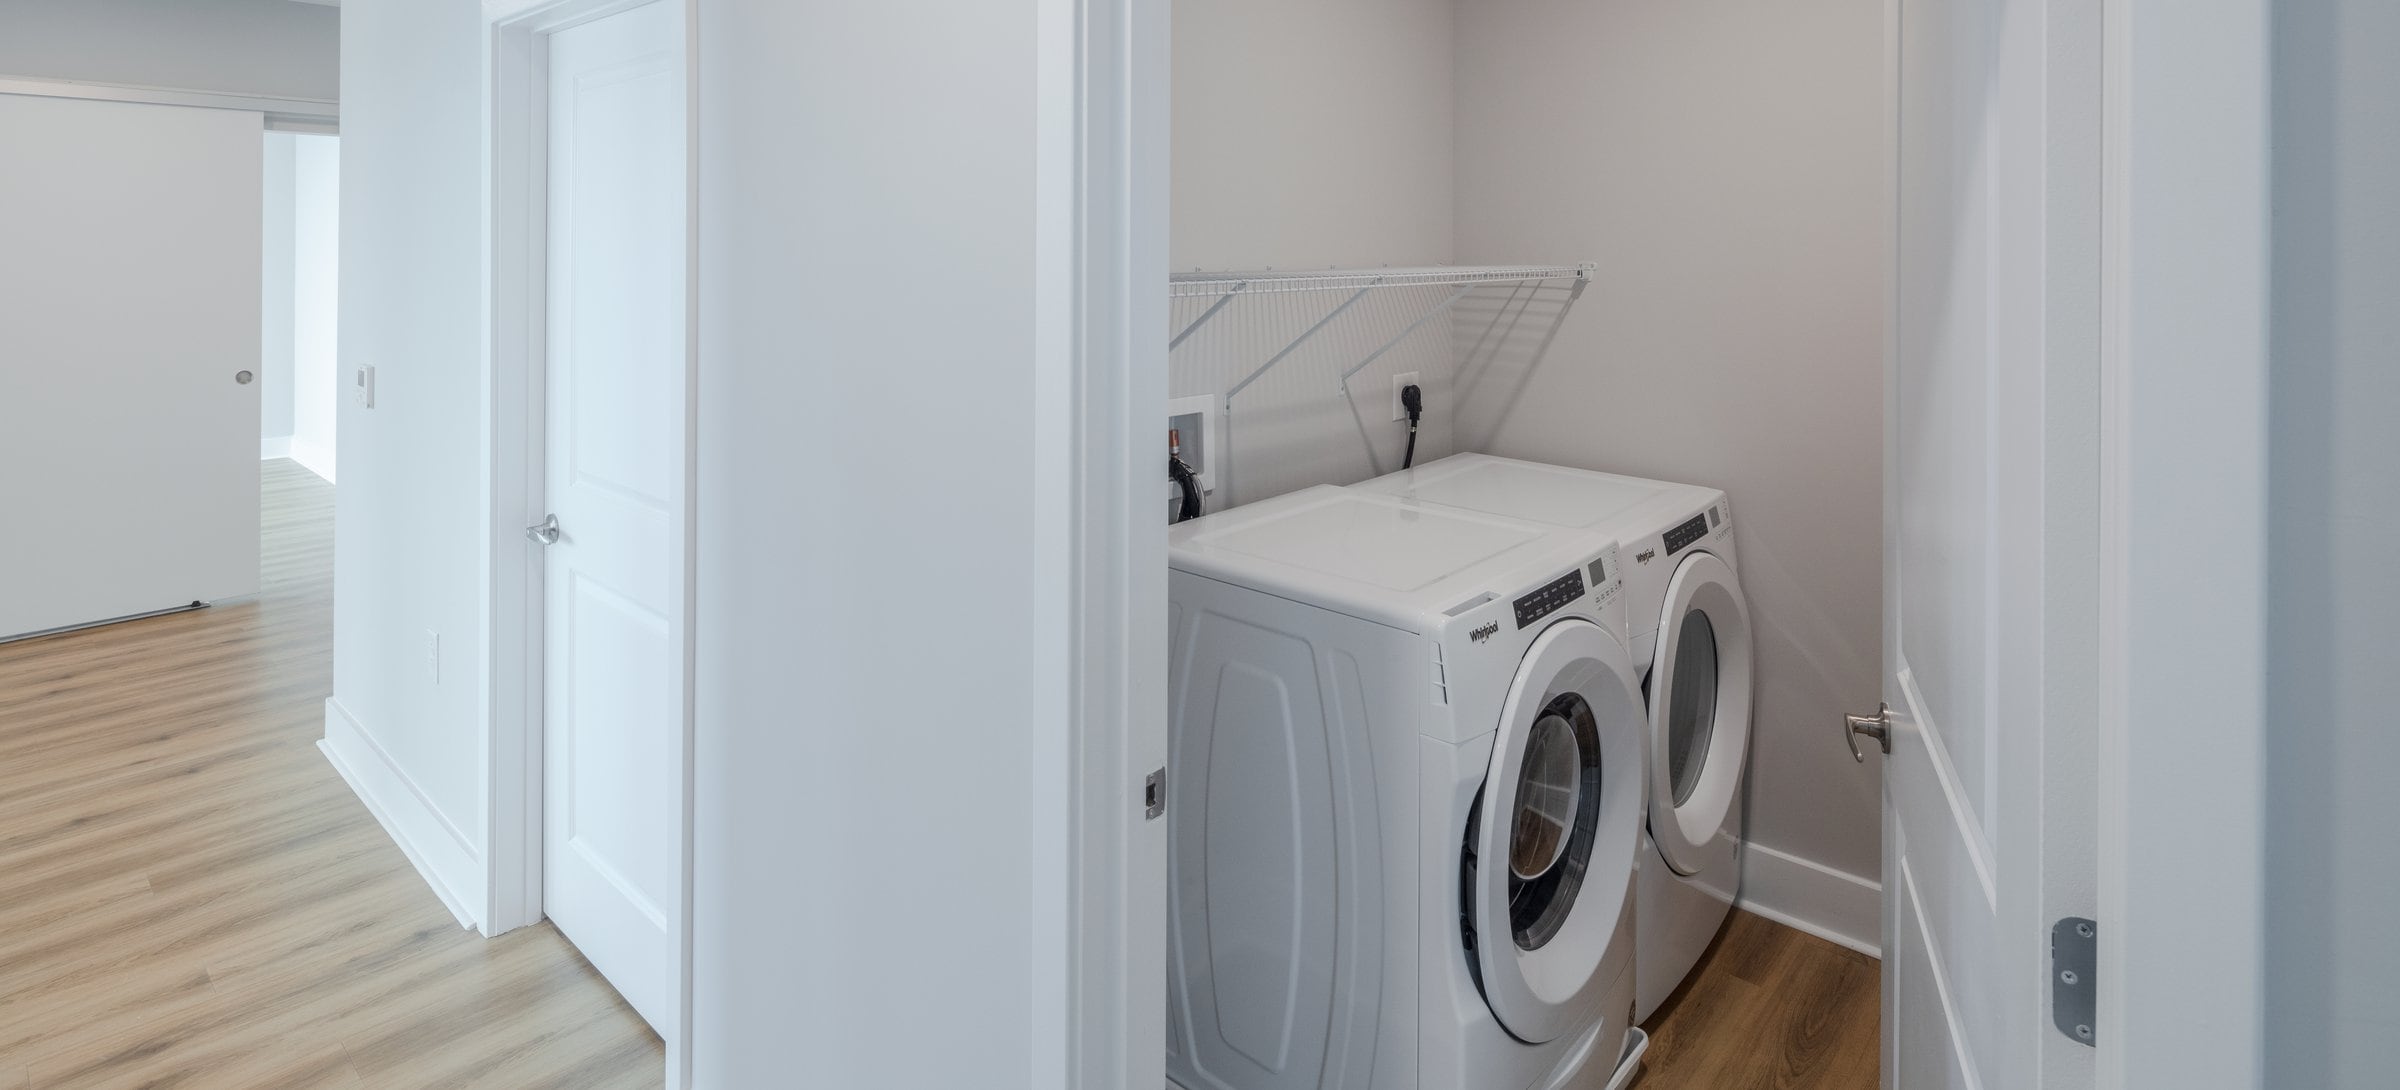 Penthouse-level Signature Collection apartment homes  with side-by-side washer and dryer